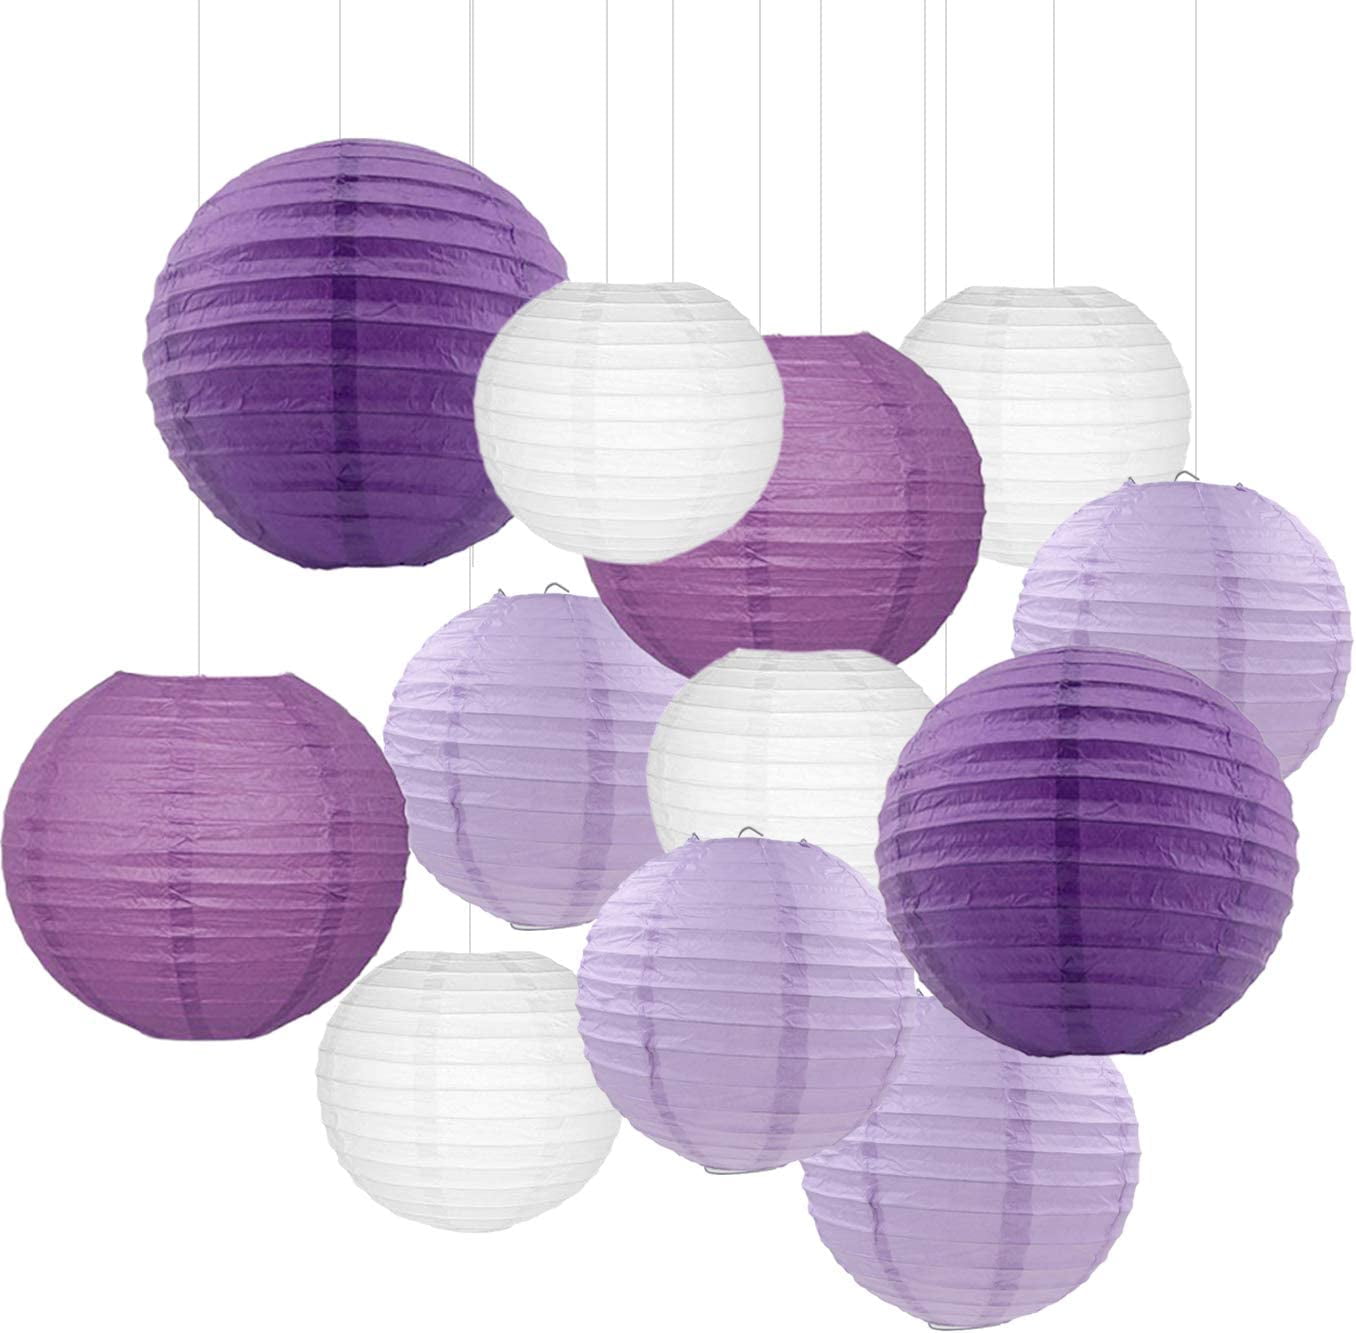 HAUSPROFI Paper Lanterns, 6 8 10 12 Round Paper Lantern with LED Lantern Lights for Indoor and Outdoor Decoration